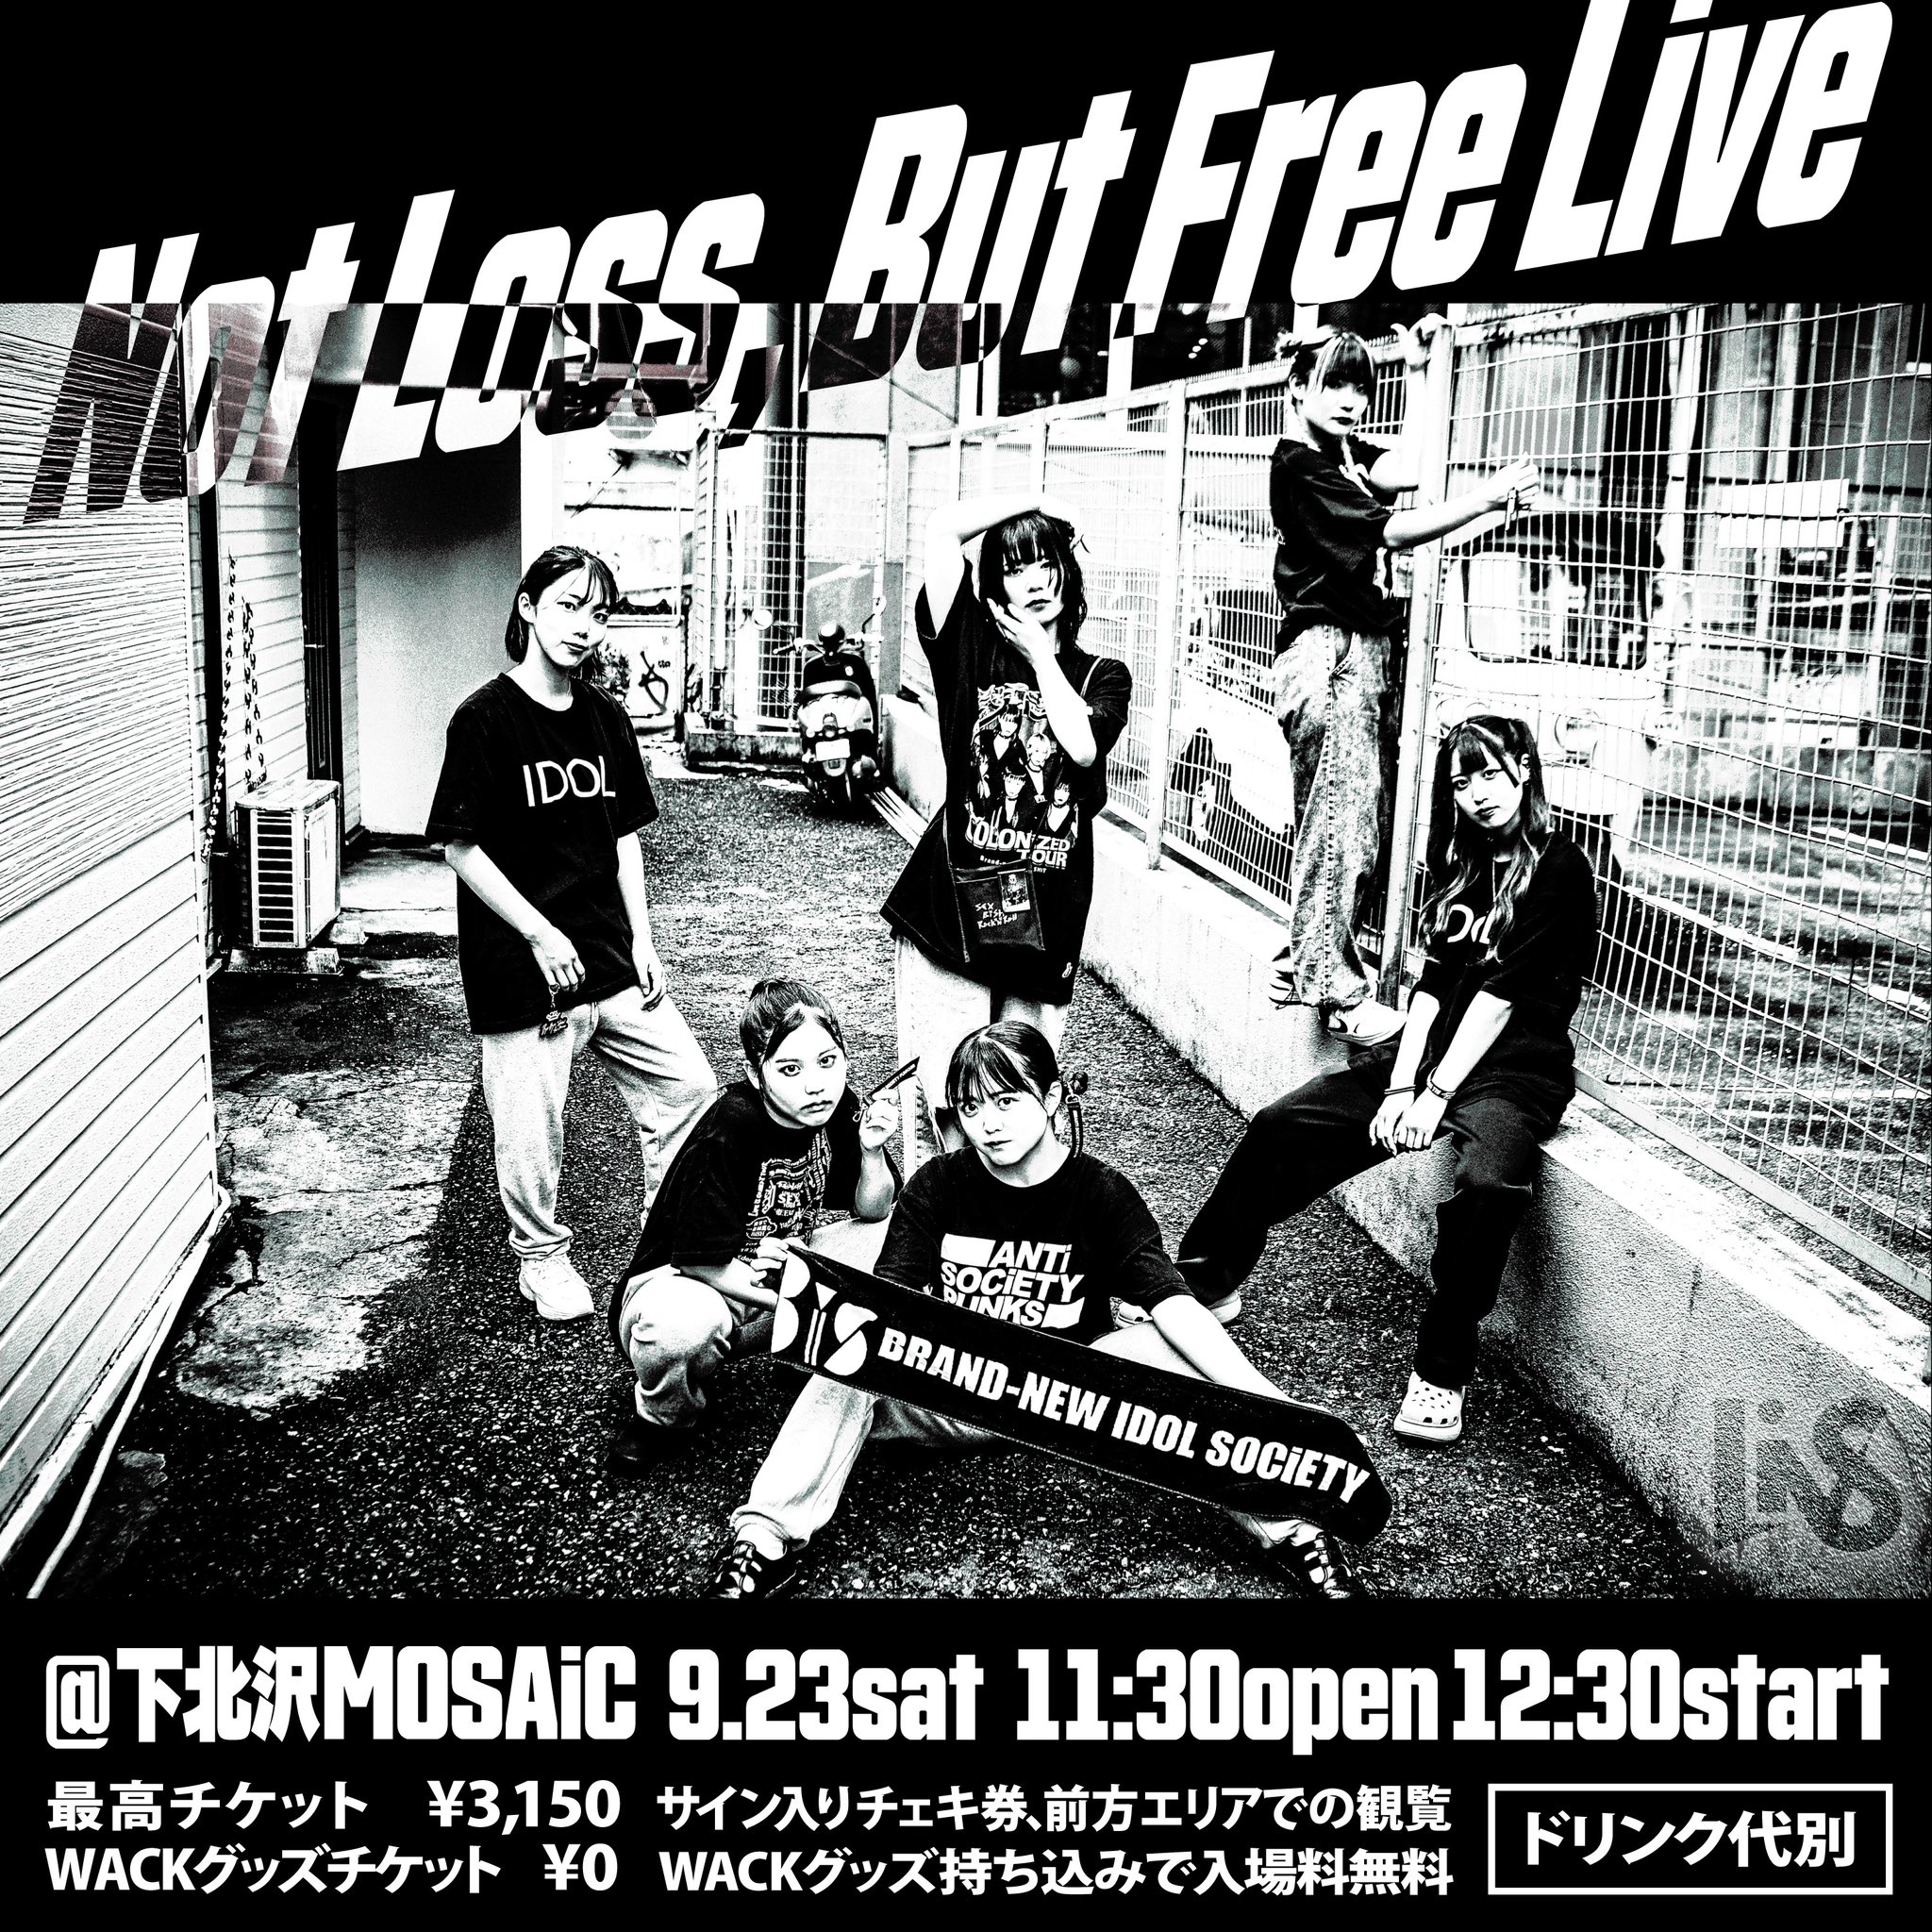 『Not Loss , But Free Live』